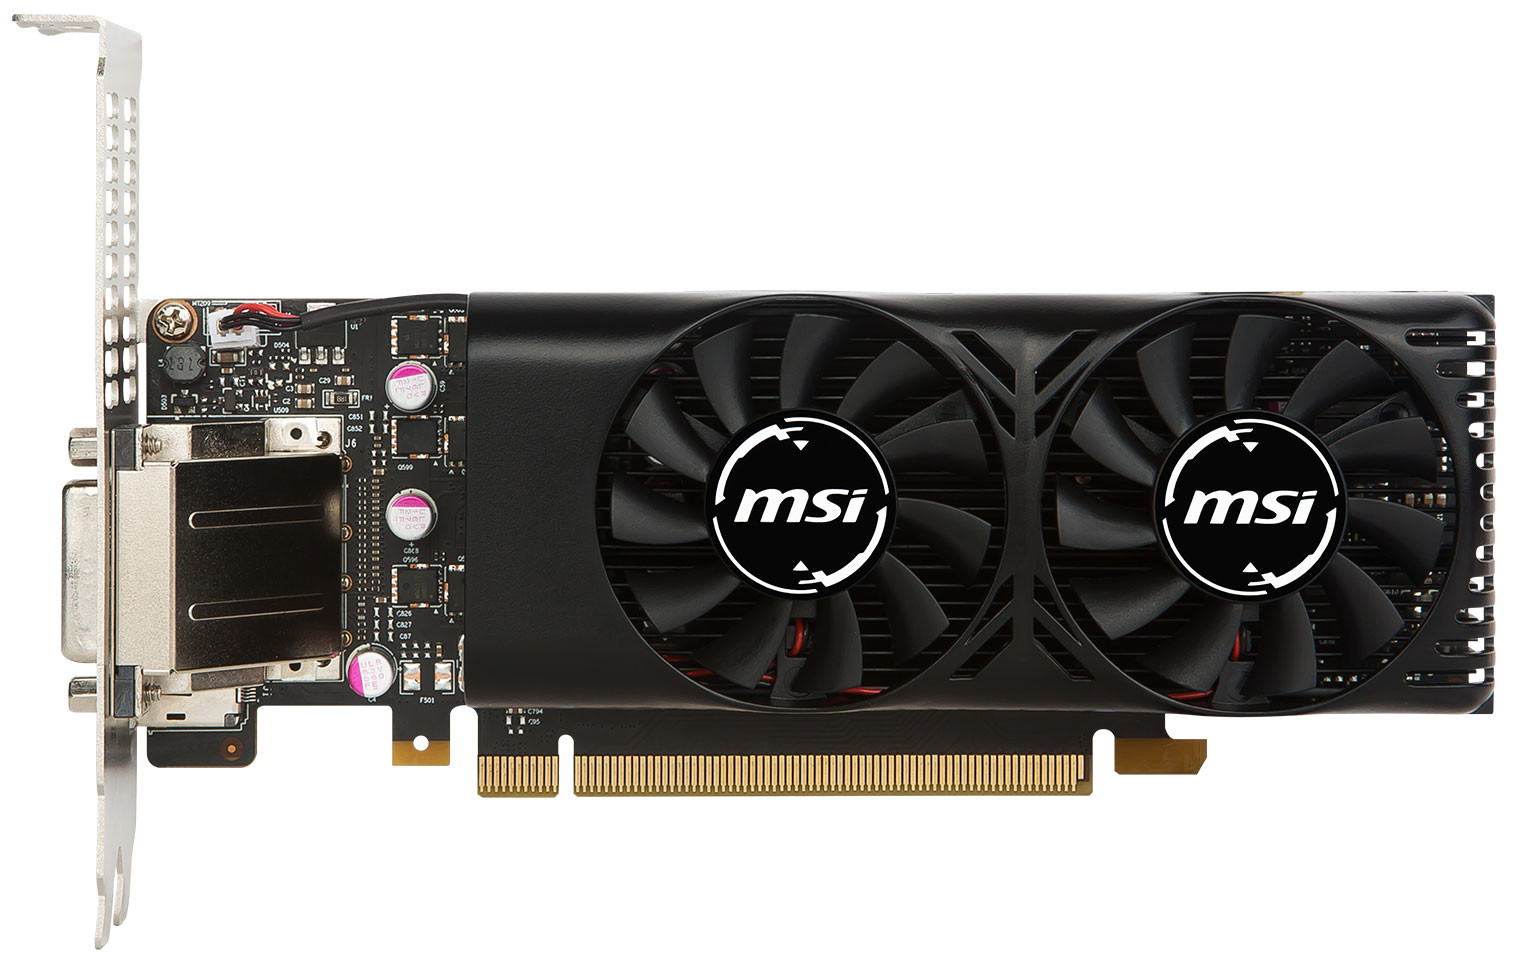 MSI Gives the GTX 1050 Low-profile 